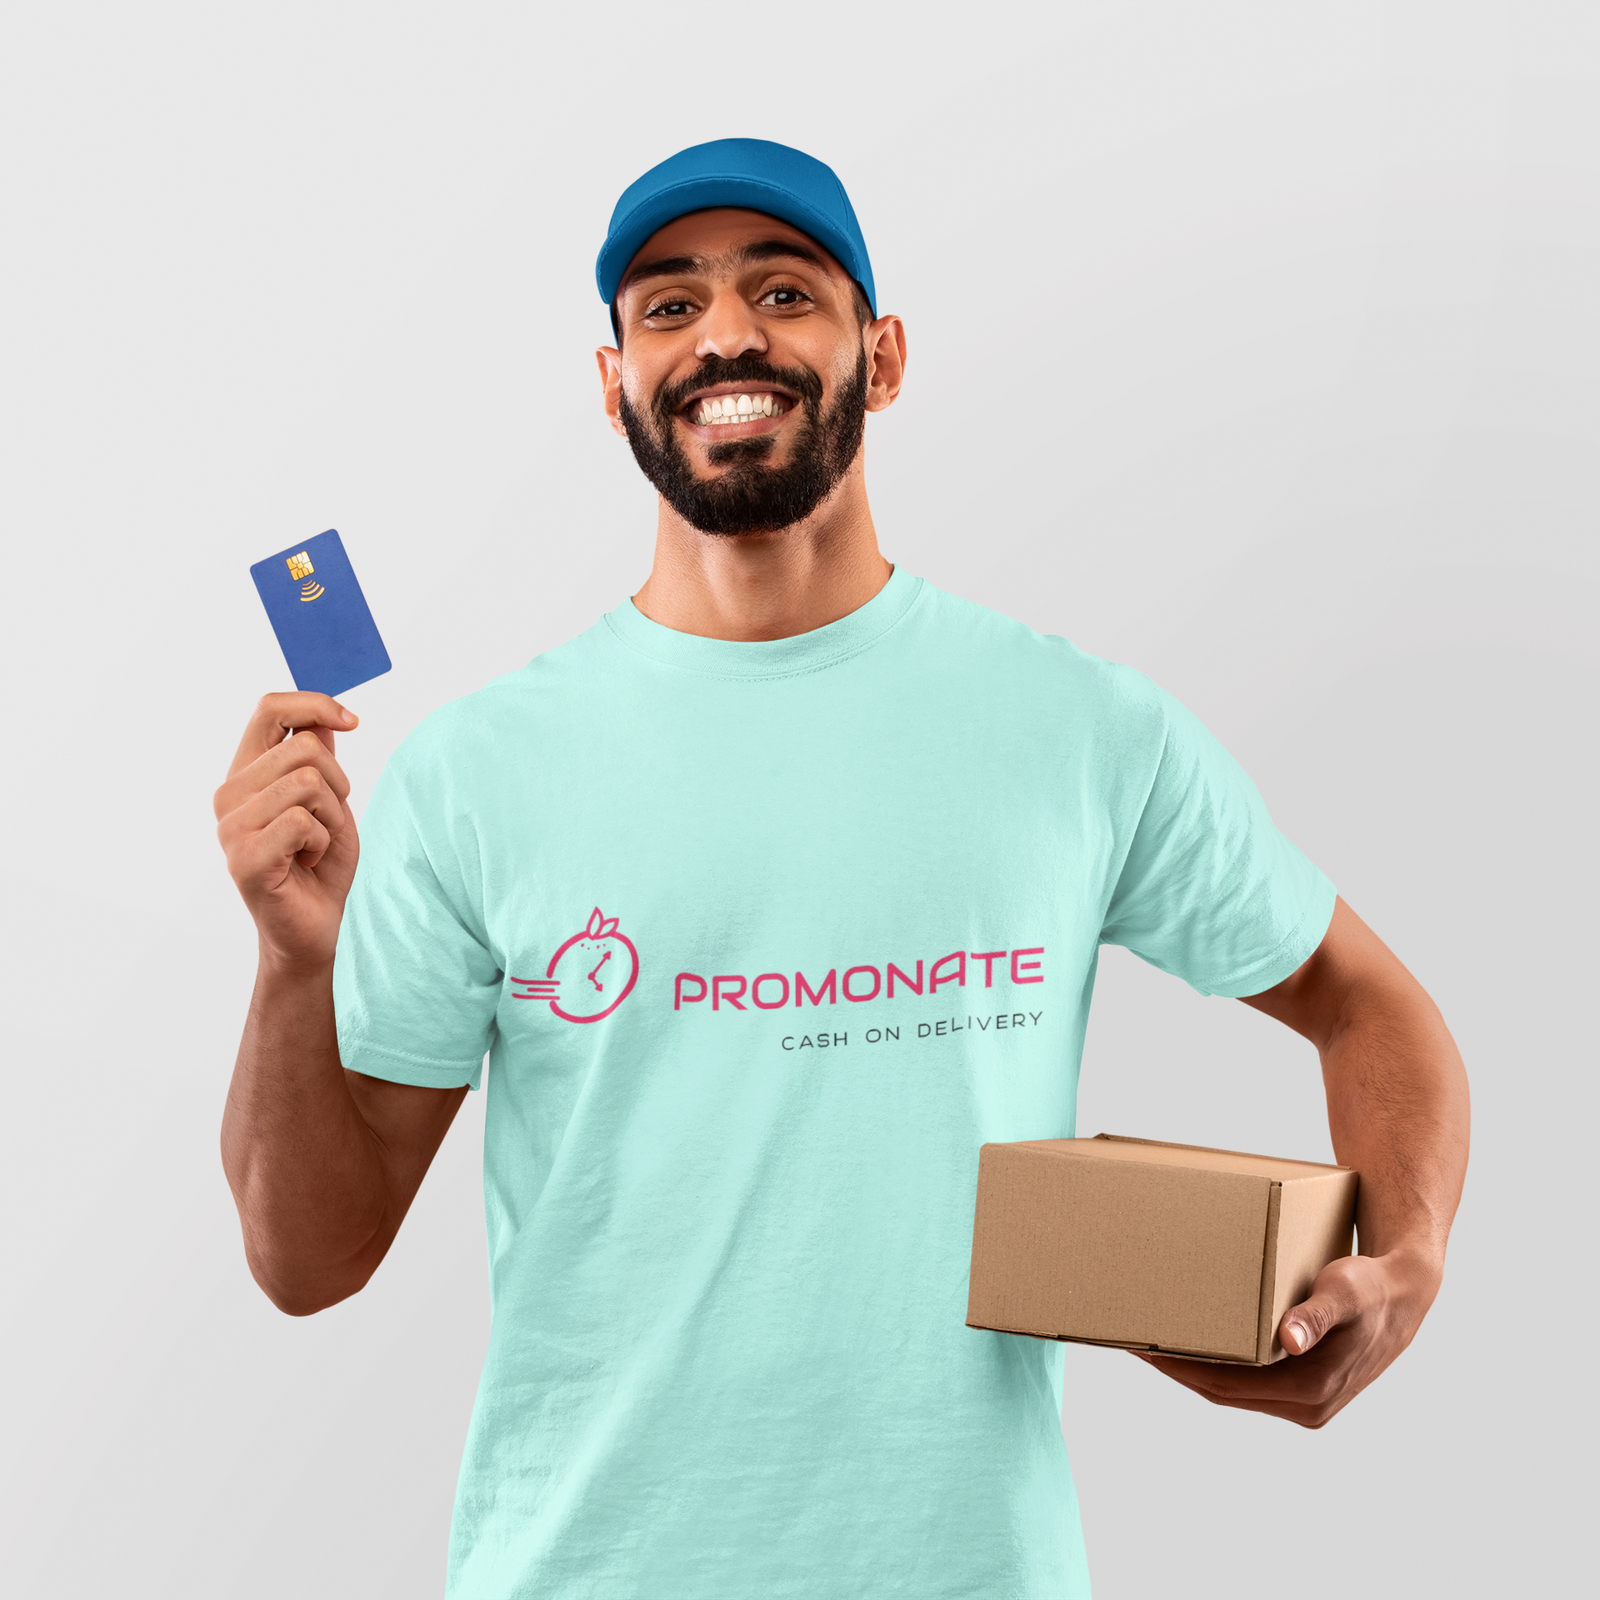 t-shirt-mockup-of-a-delivery-man-ready-to-take-a-credit-card-payment-m17966-r-el2